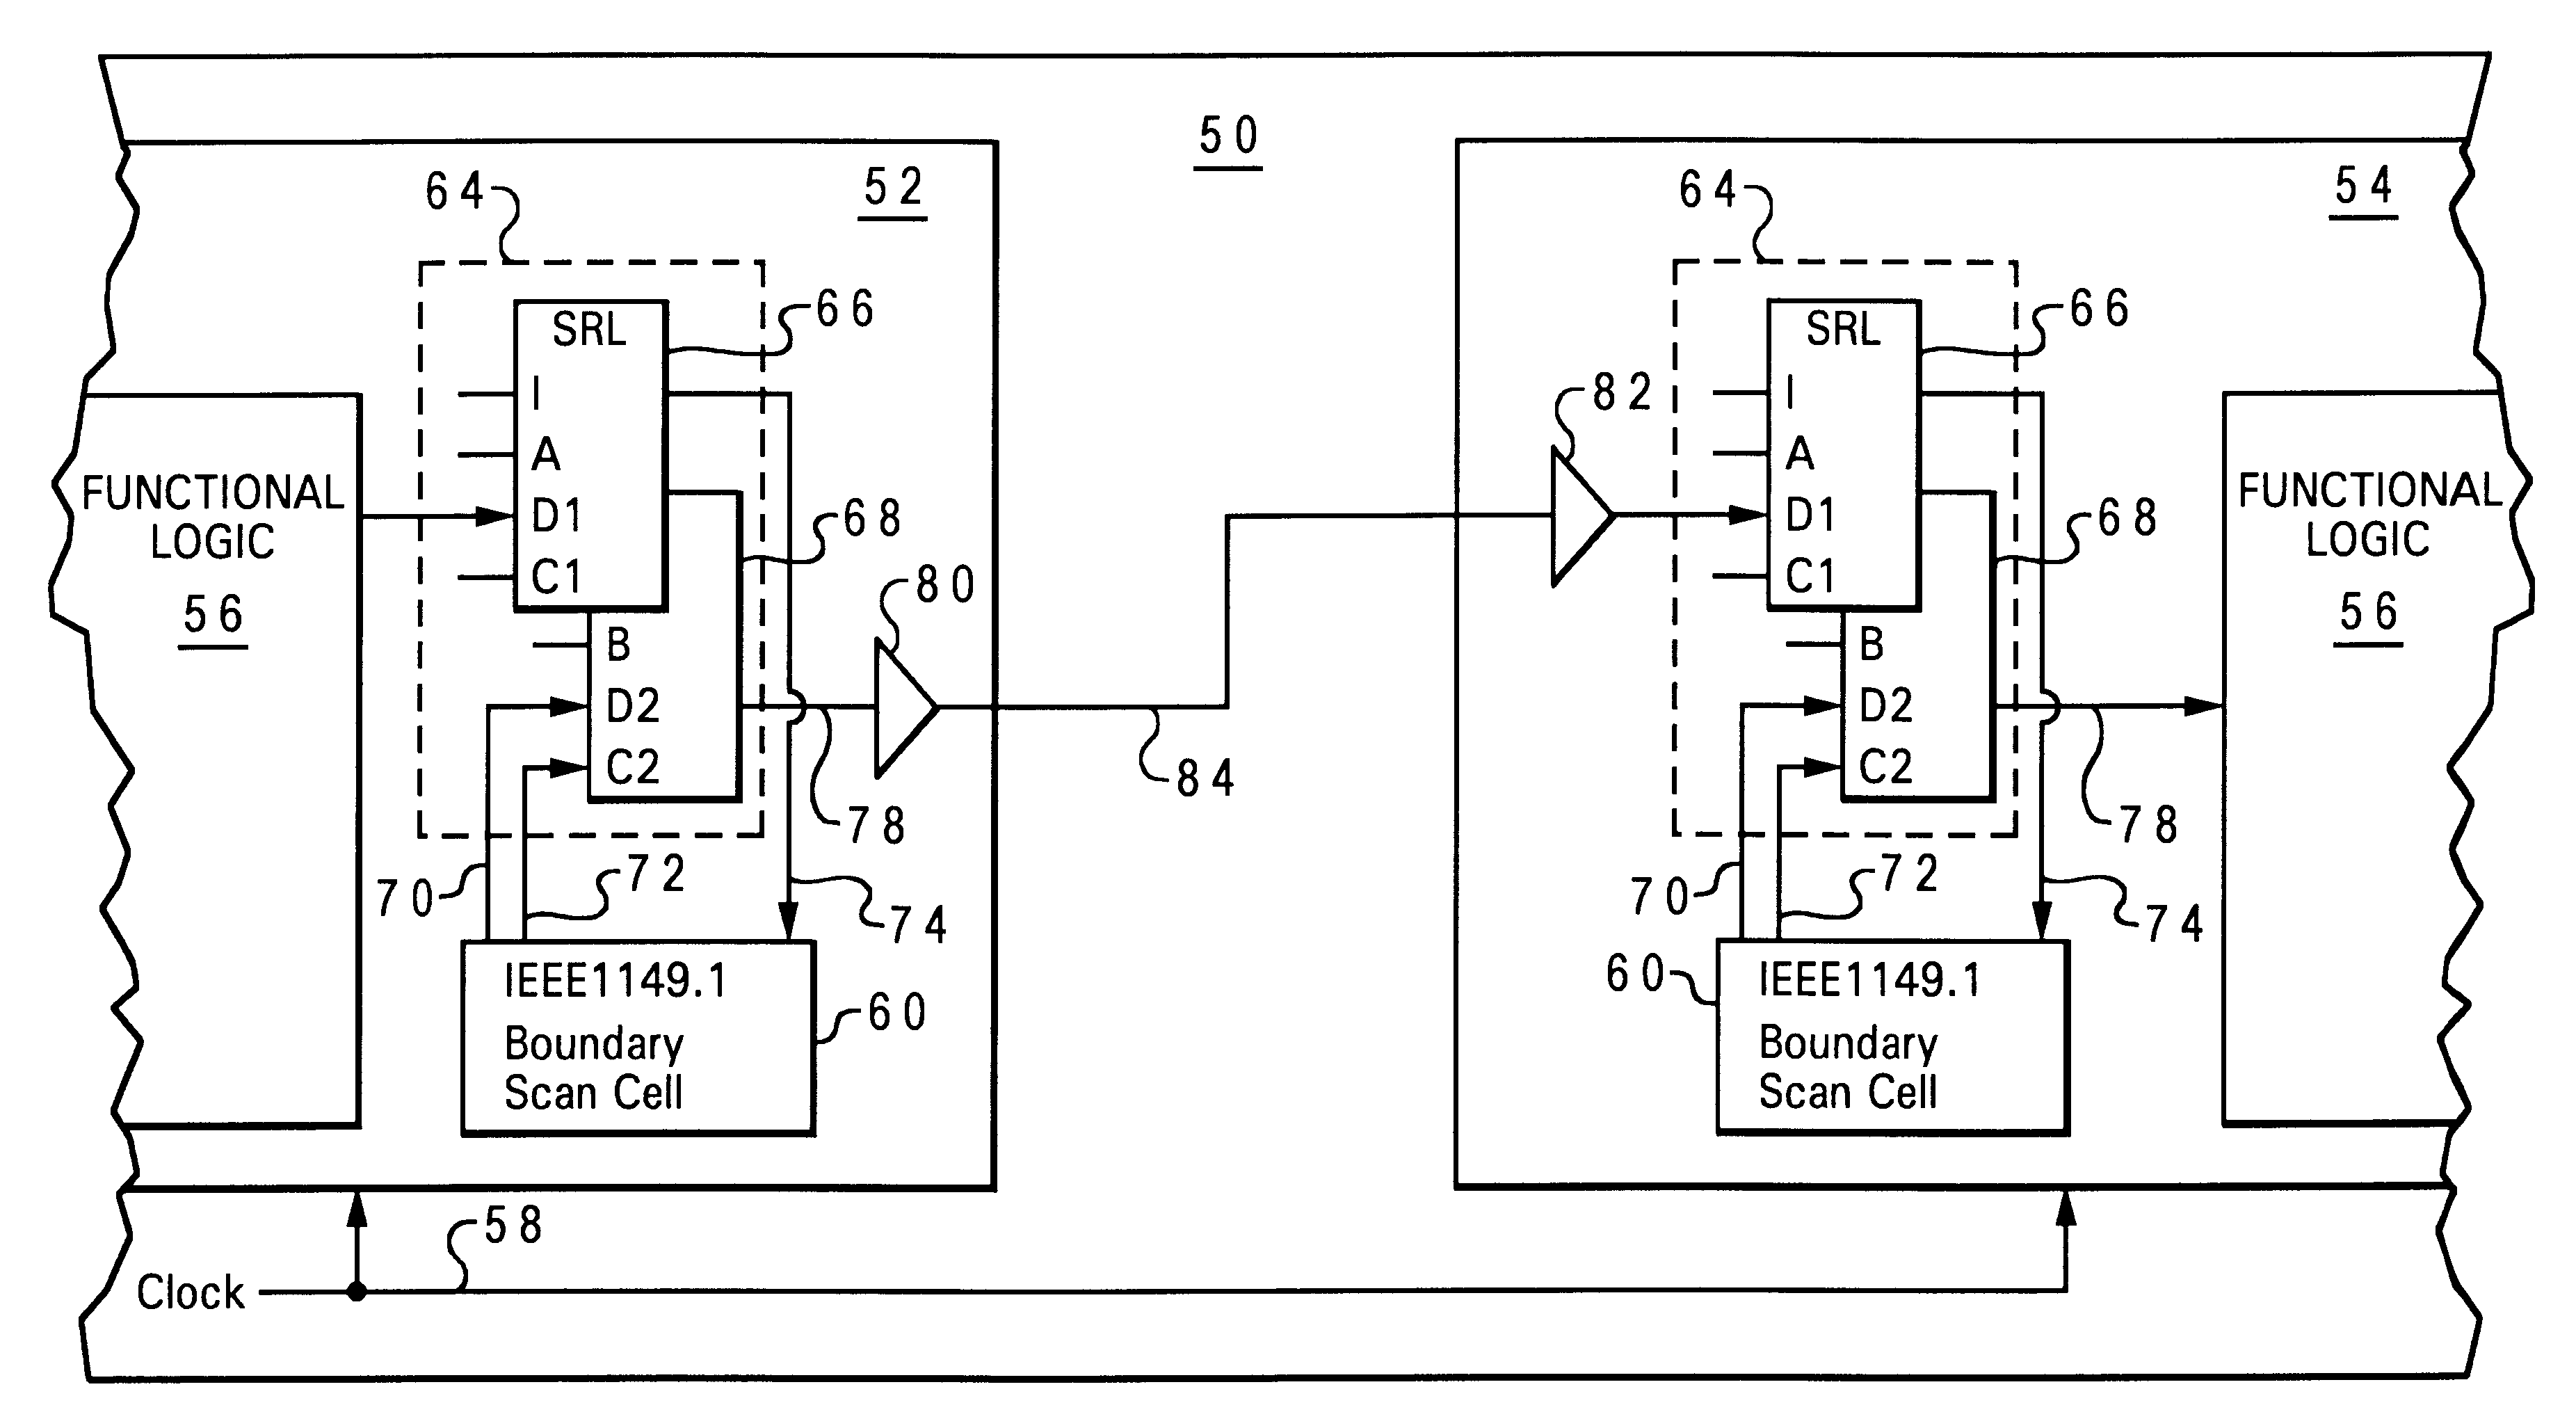 High-performance IEEE1149.1-compliant boundary scan cell